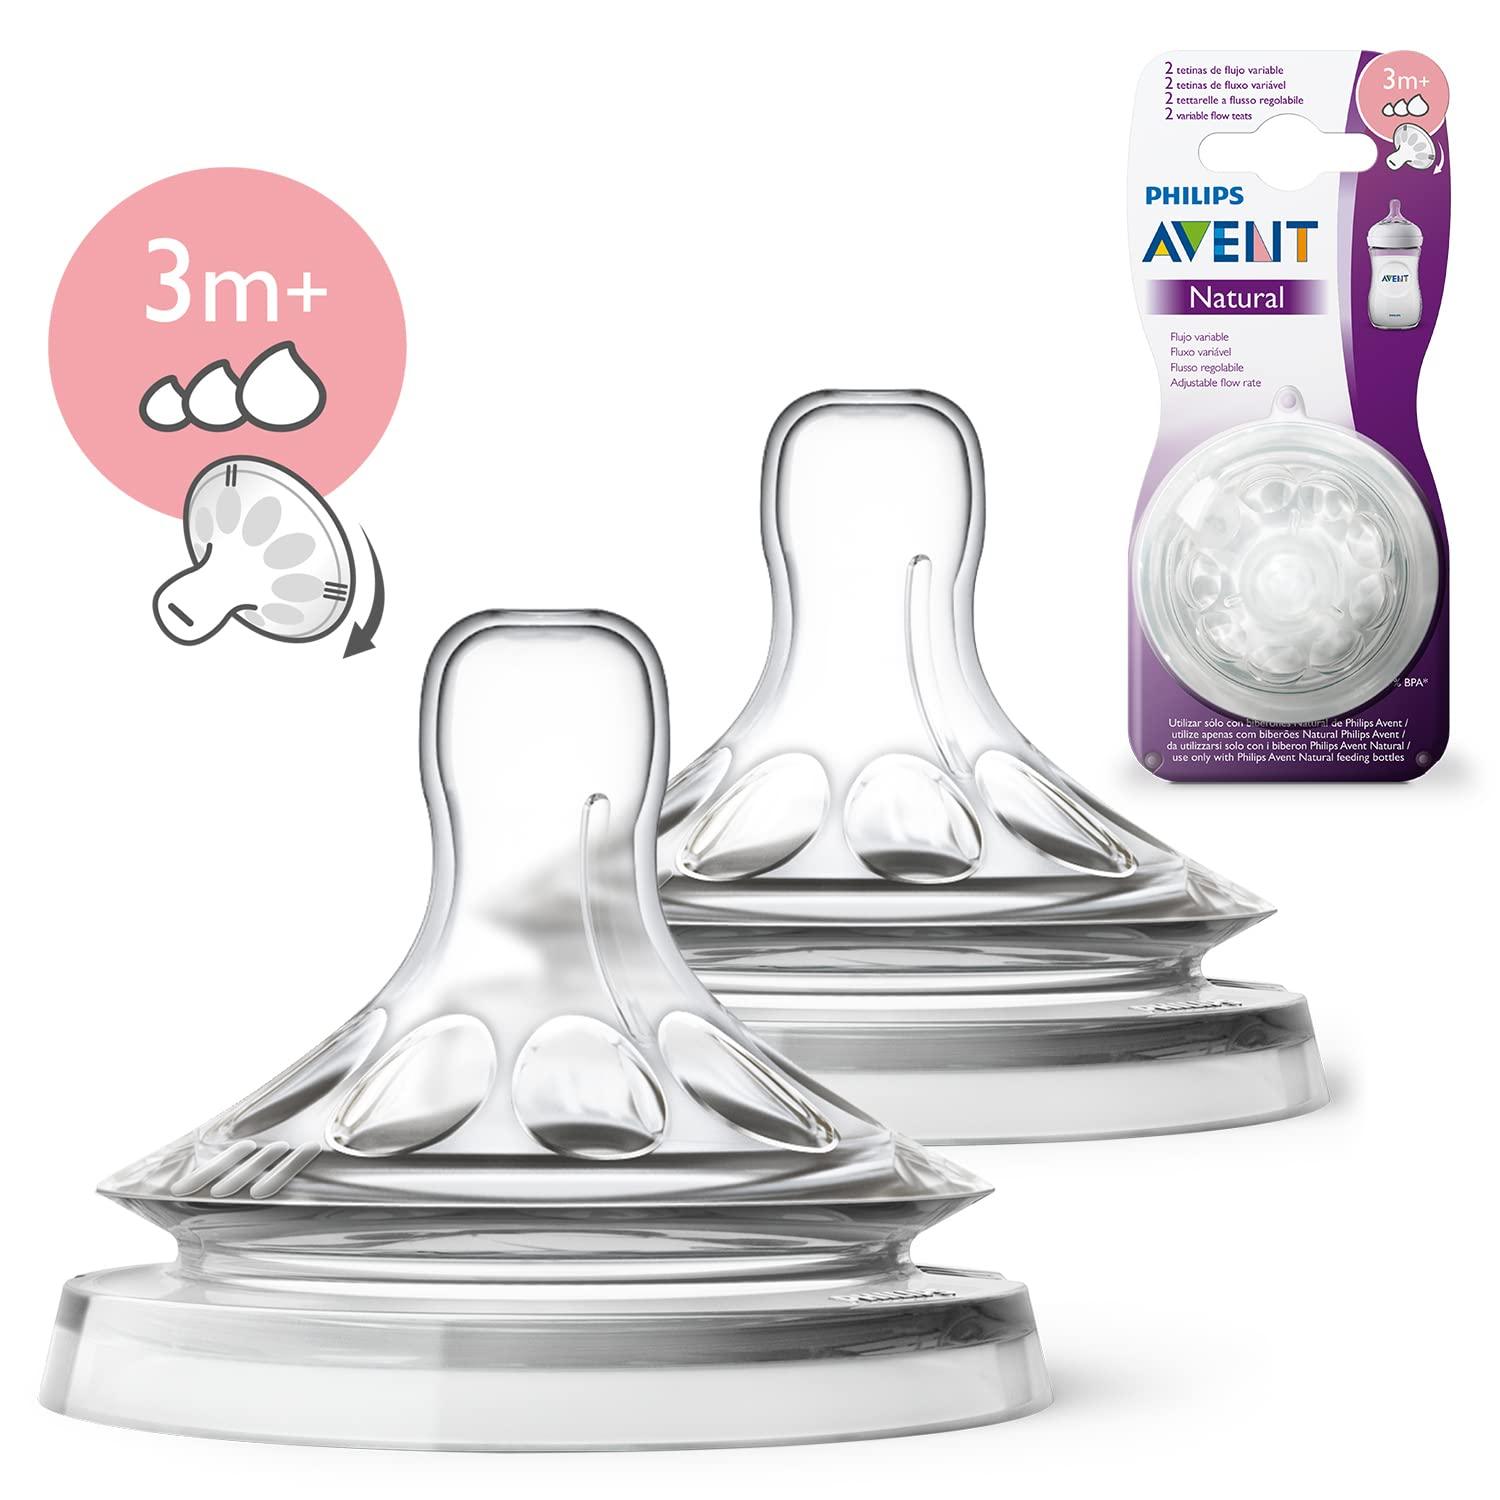 2 Tetinas advanced Antic-colic 0m+ flujo variable. Tommee Tippee